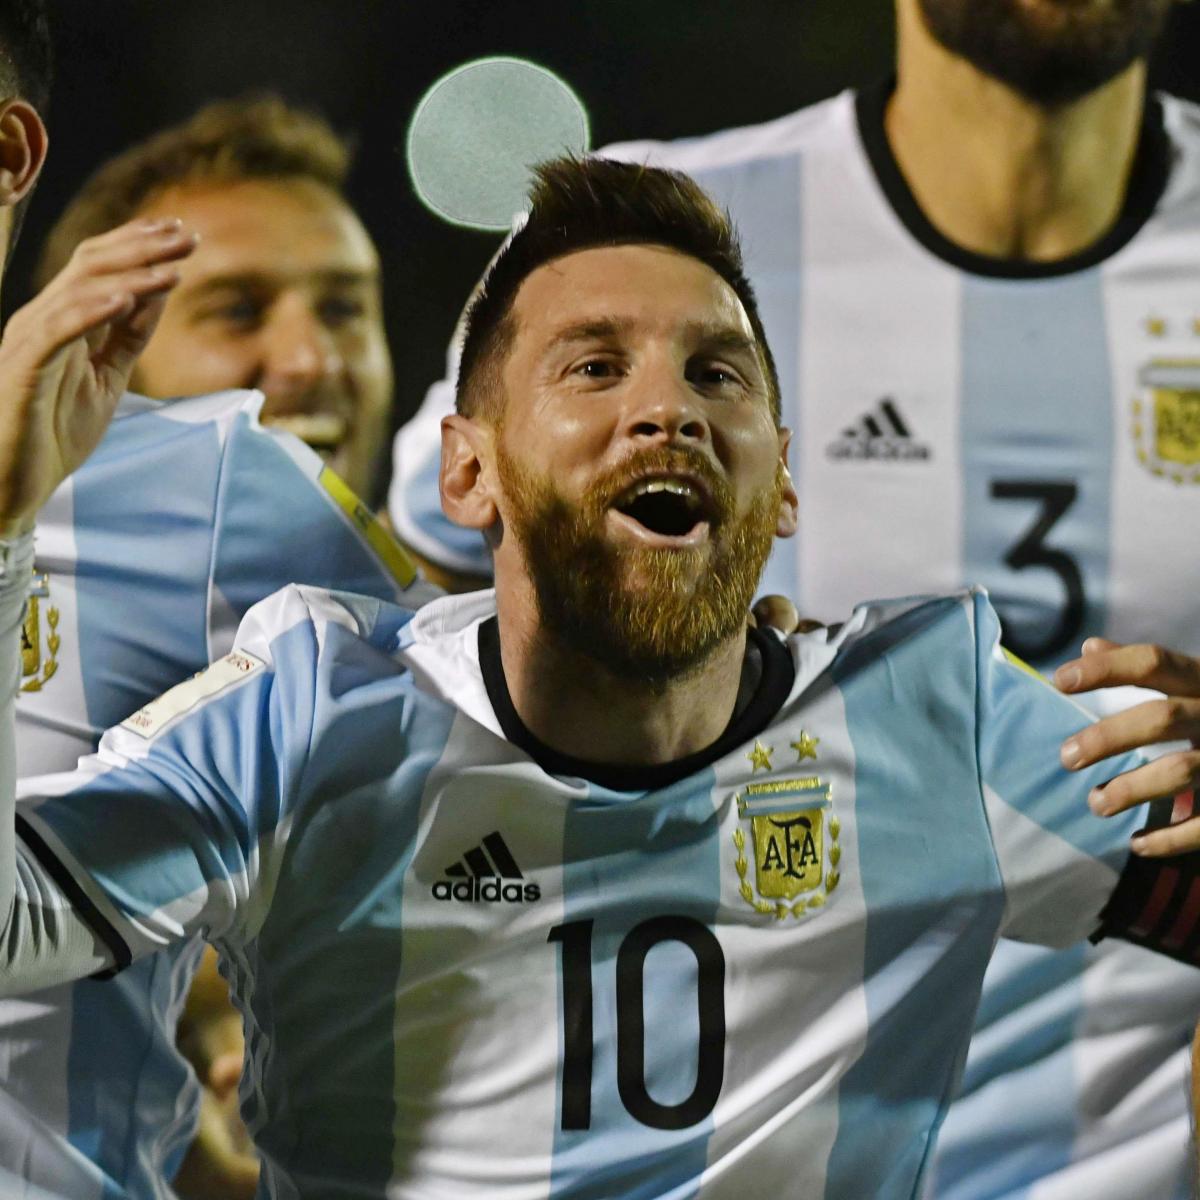 Mario Kempes wants to manage Lionel Messi and Argentina - Barca